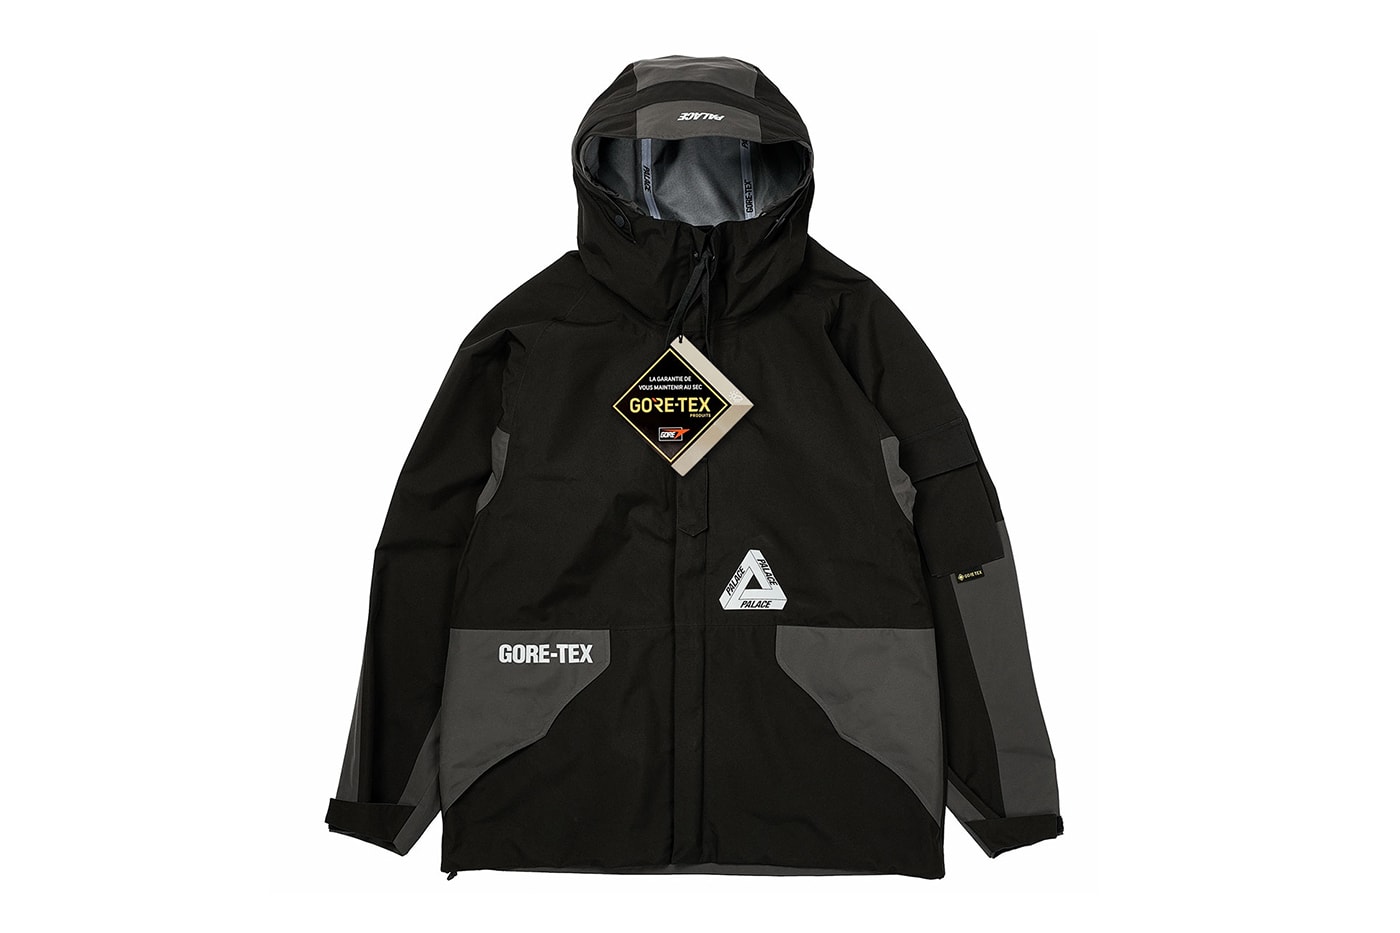 Palace Fall 2020 GORE-TEX Jacket Pants Release Info Date Buy Price Black White Camo